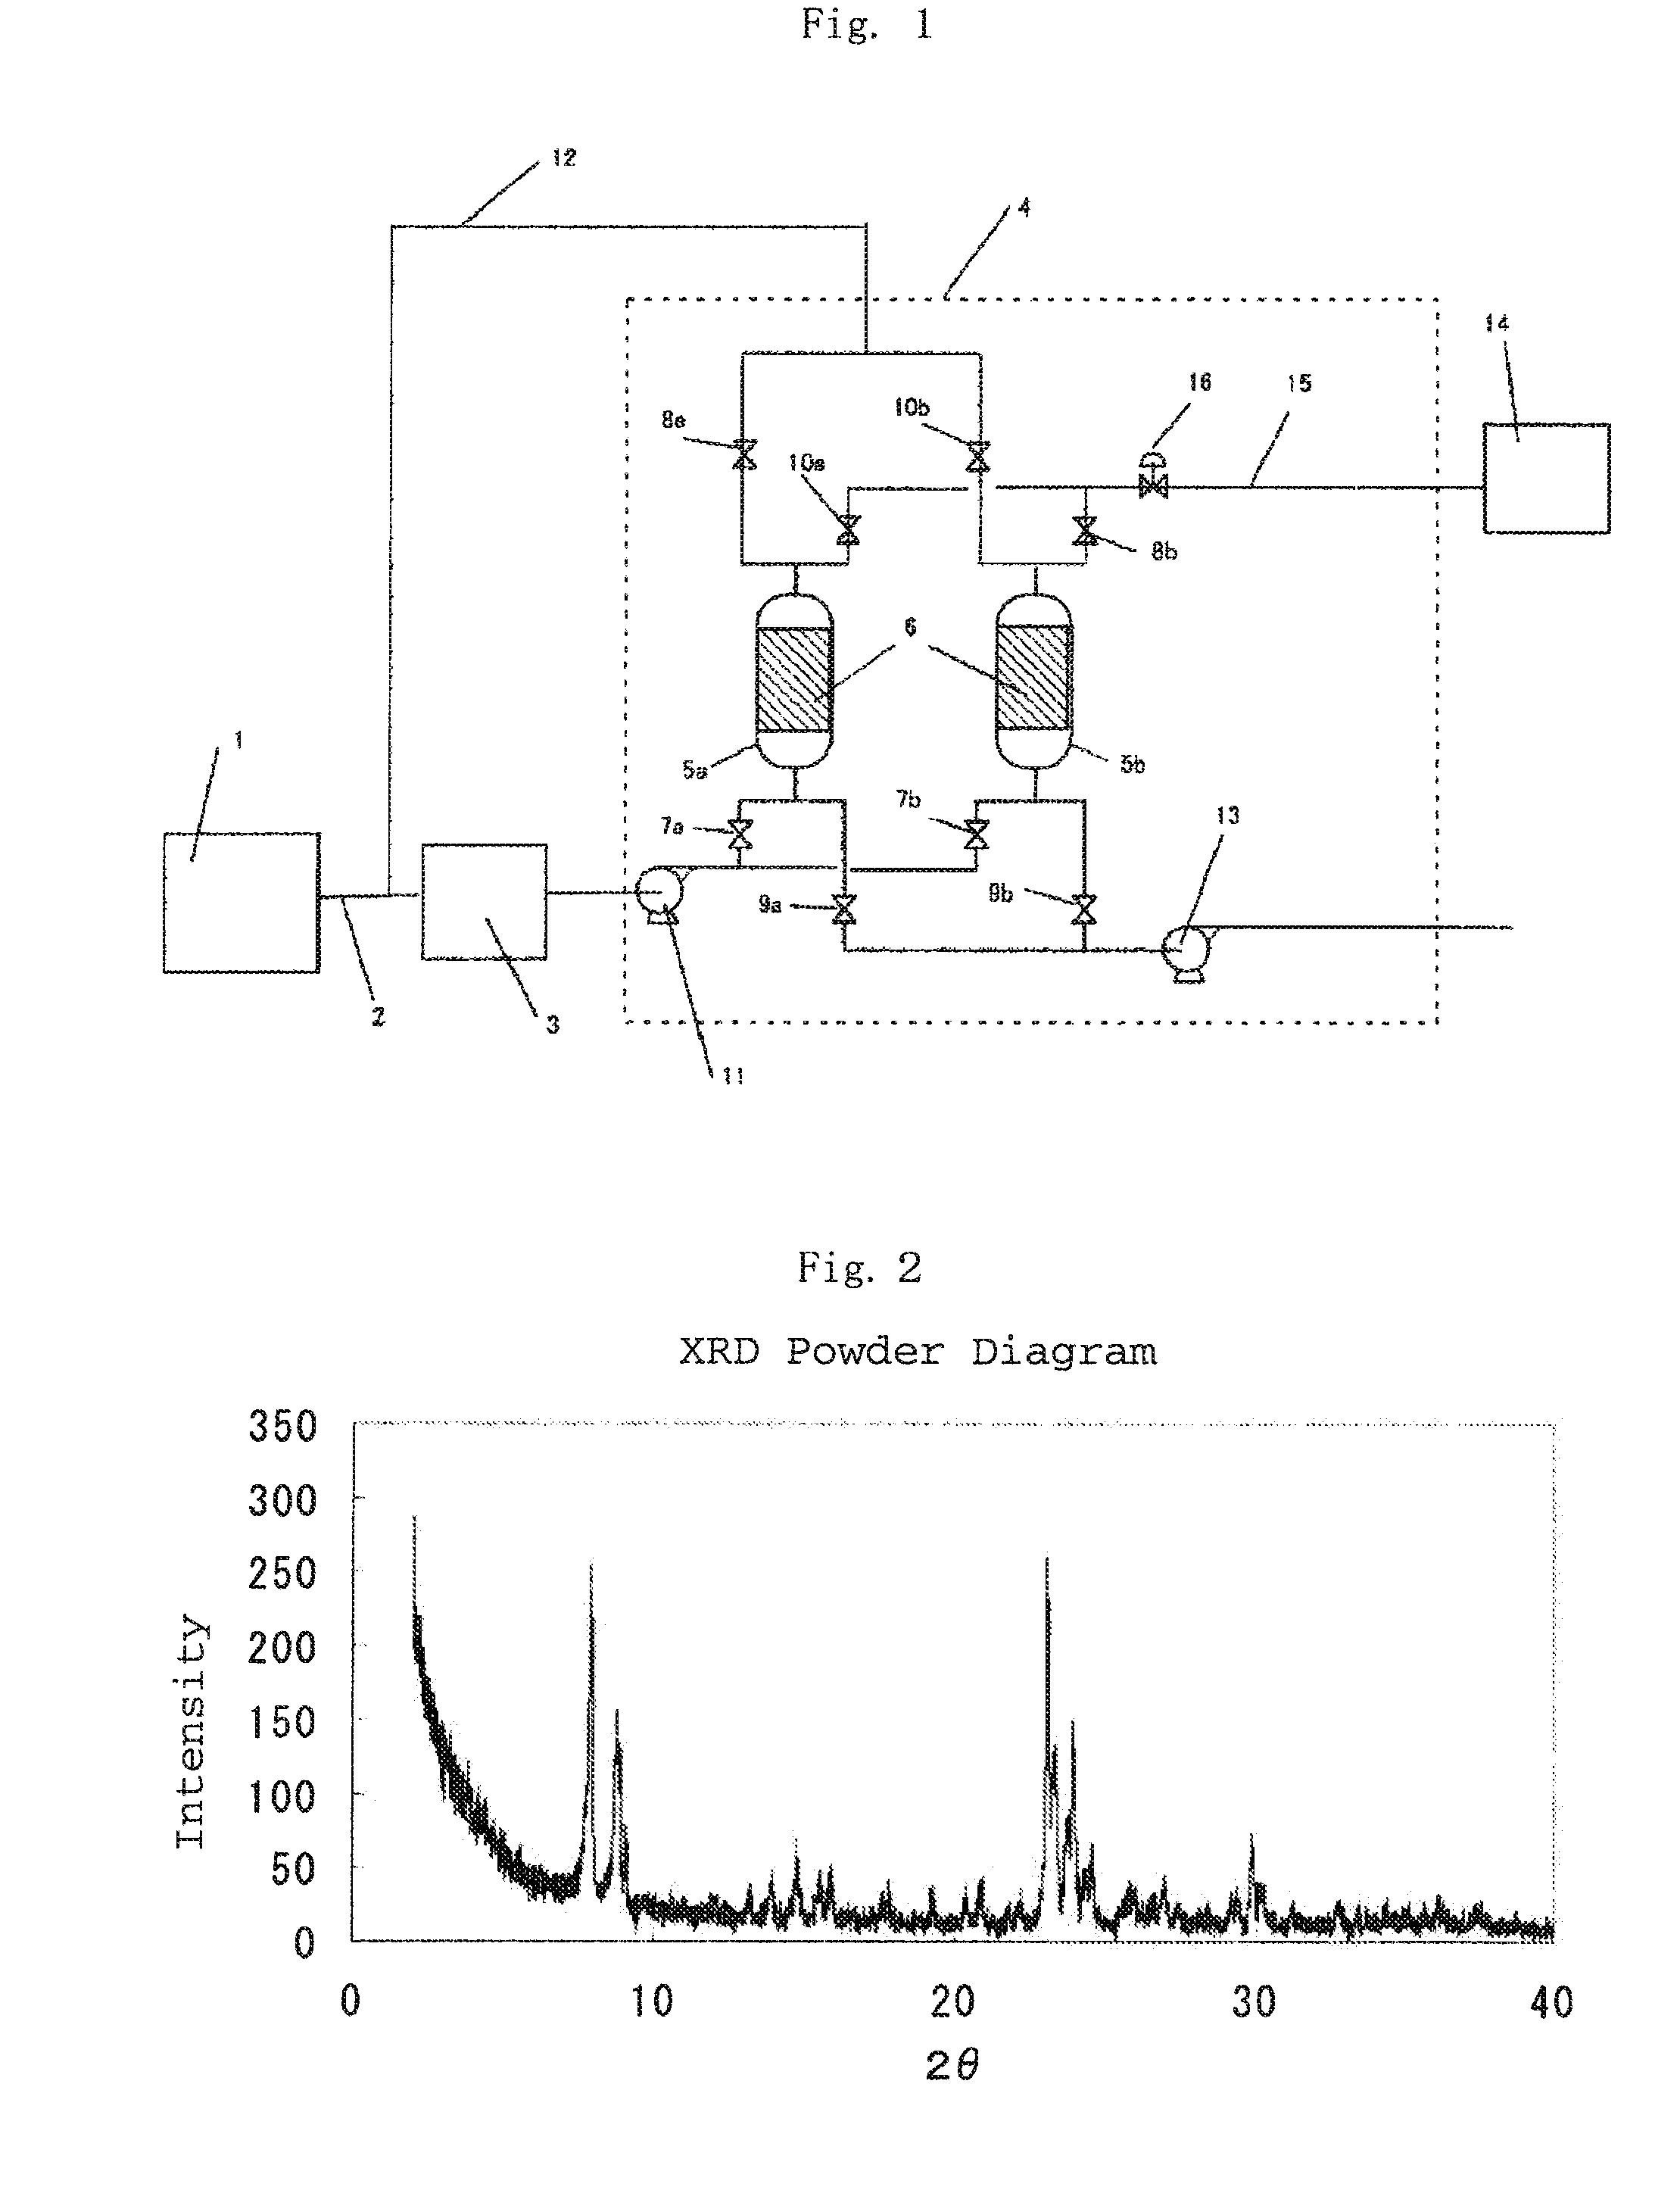 Method and apparatus for producing and storing ozone using adsorbent